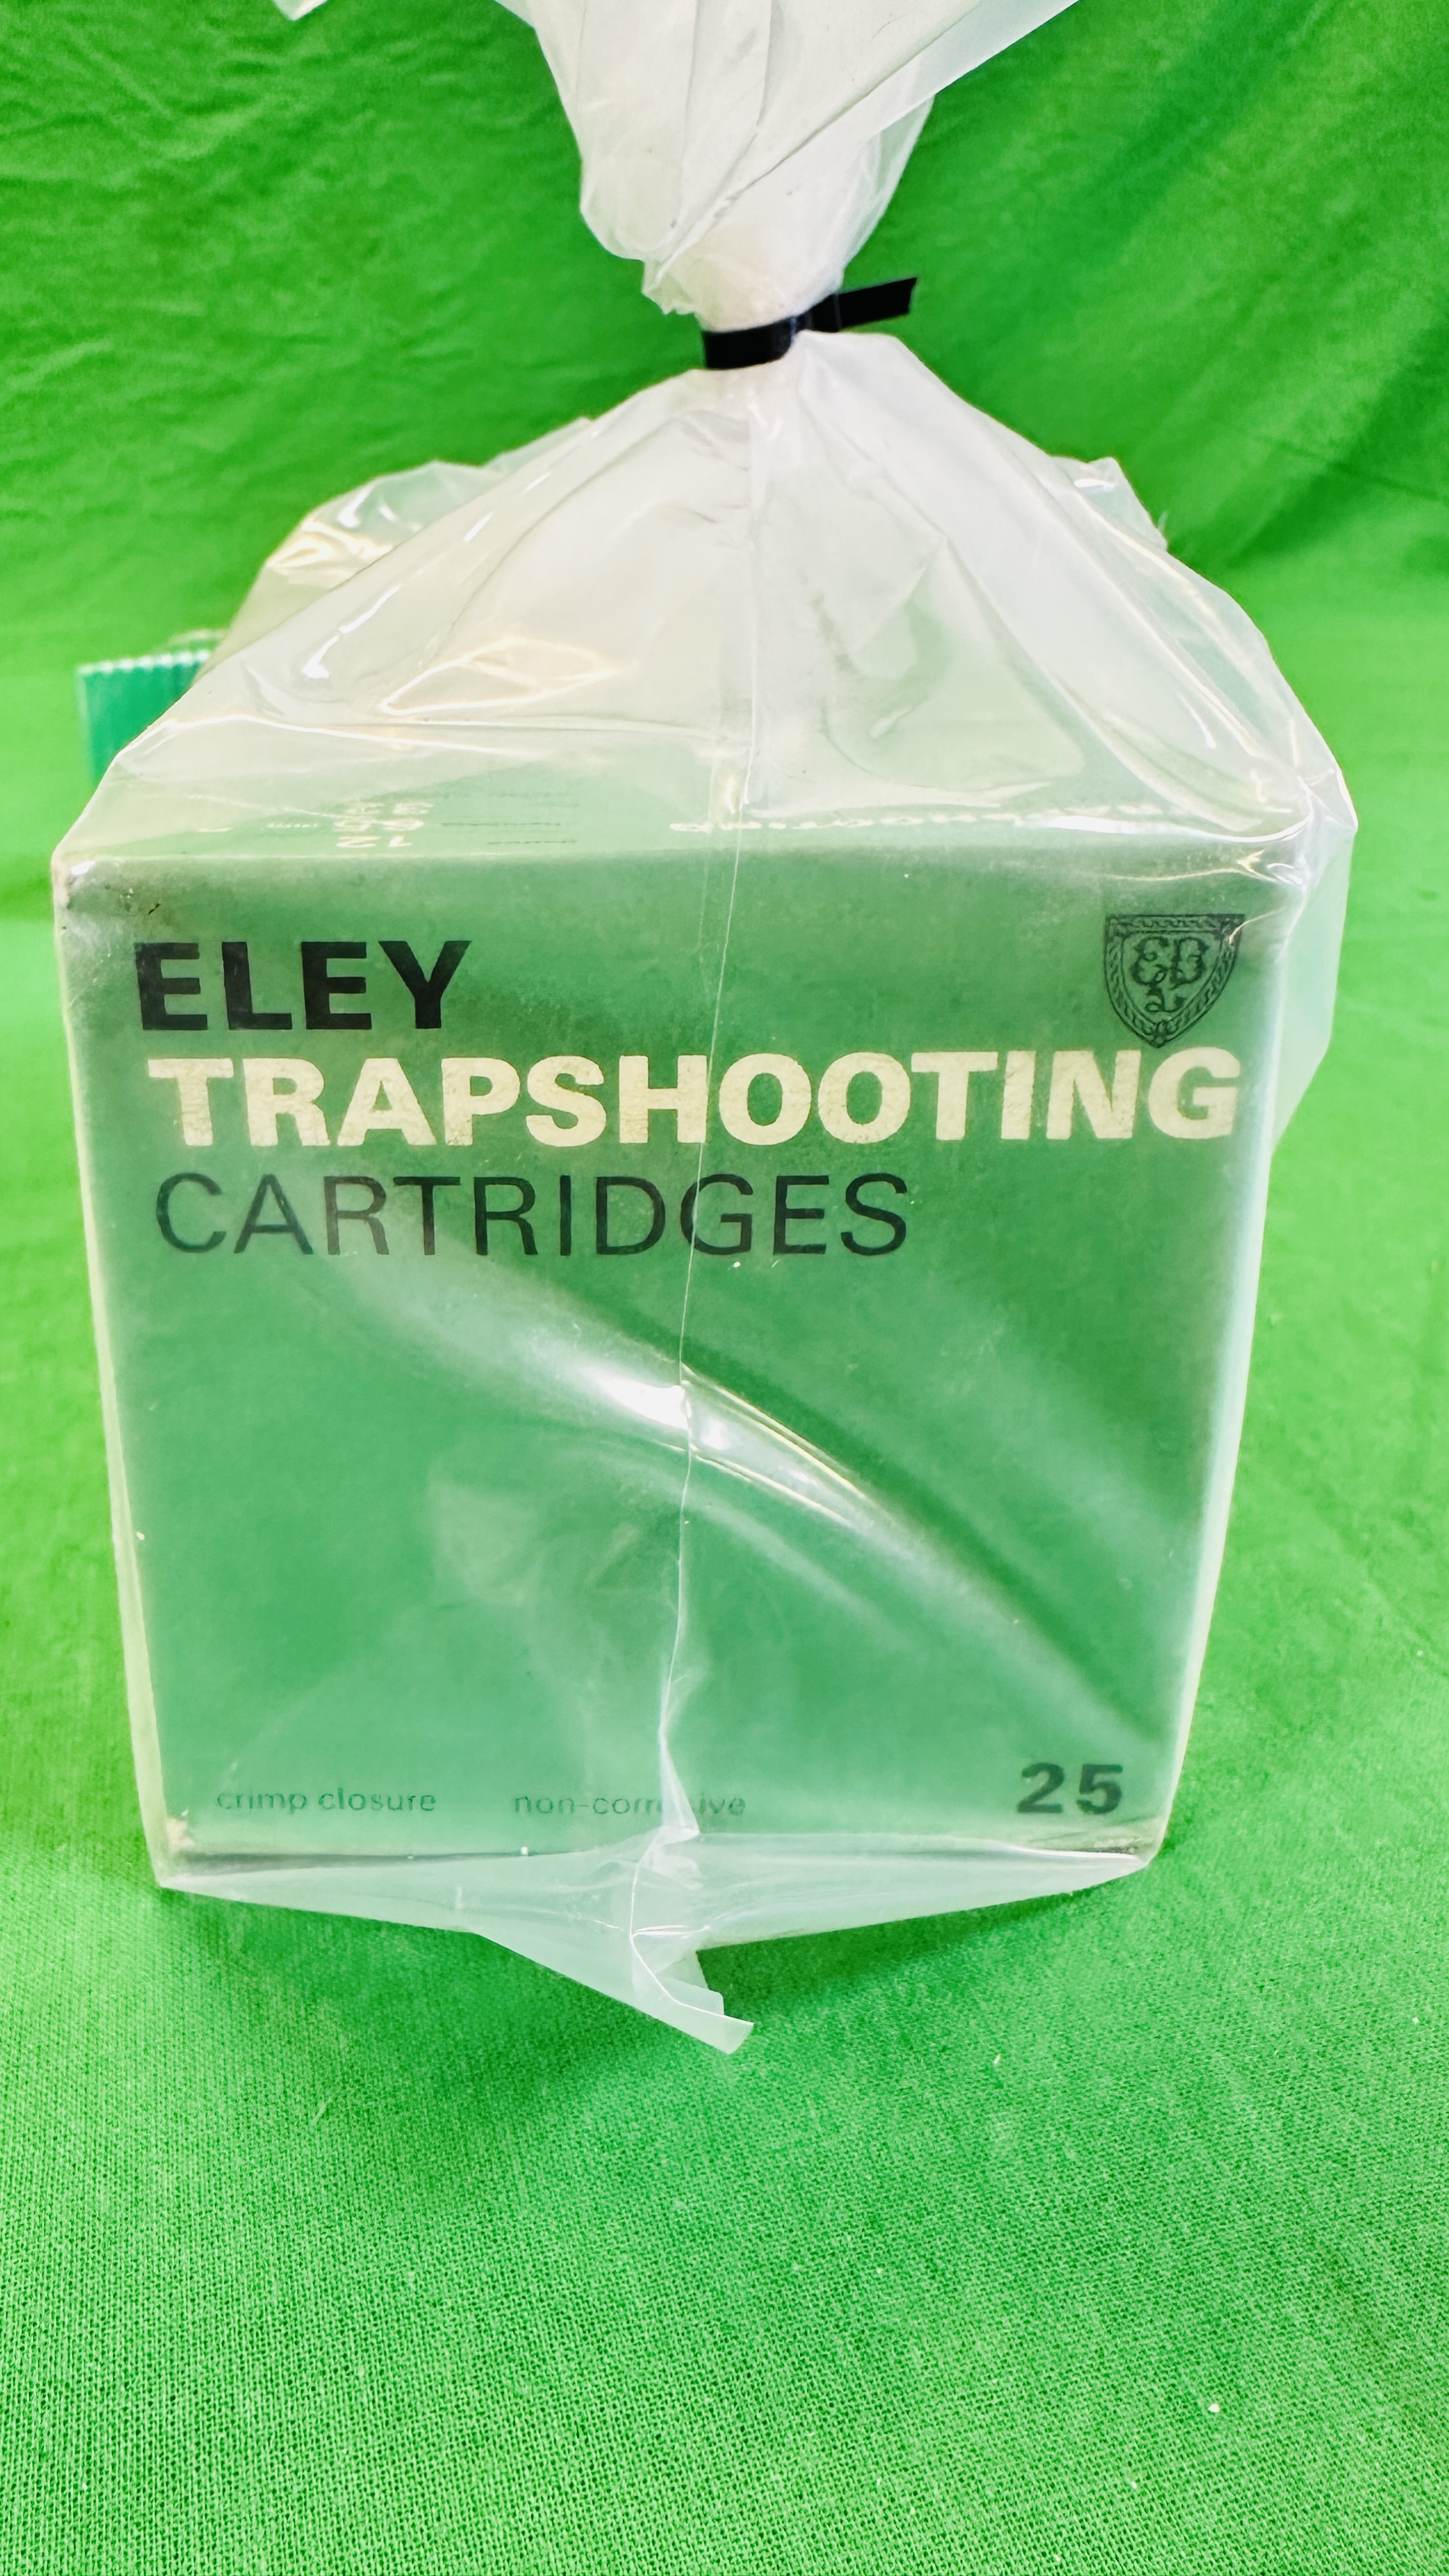 100 X ELEY TRAPSHOOTING CARTRIDGES 12 GAUGE 32GRM - (TO BE COLLECTED IN PERSON BY LICENCE HOLDER